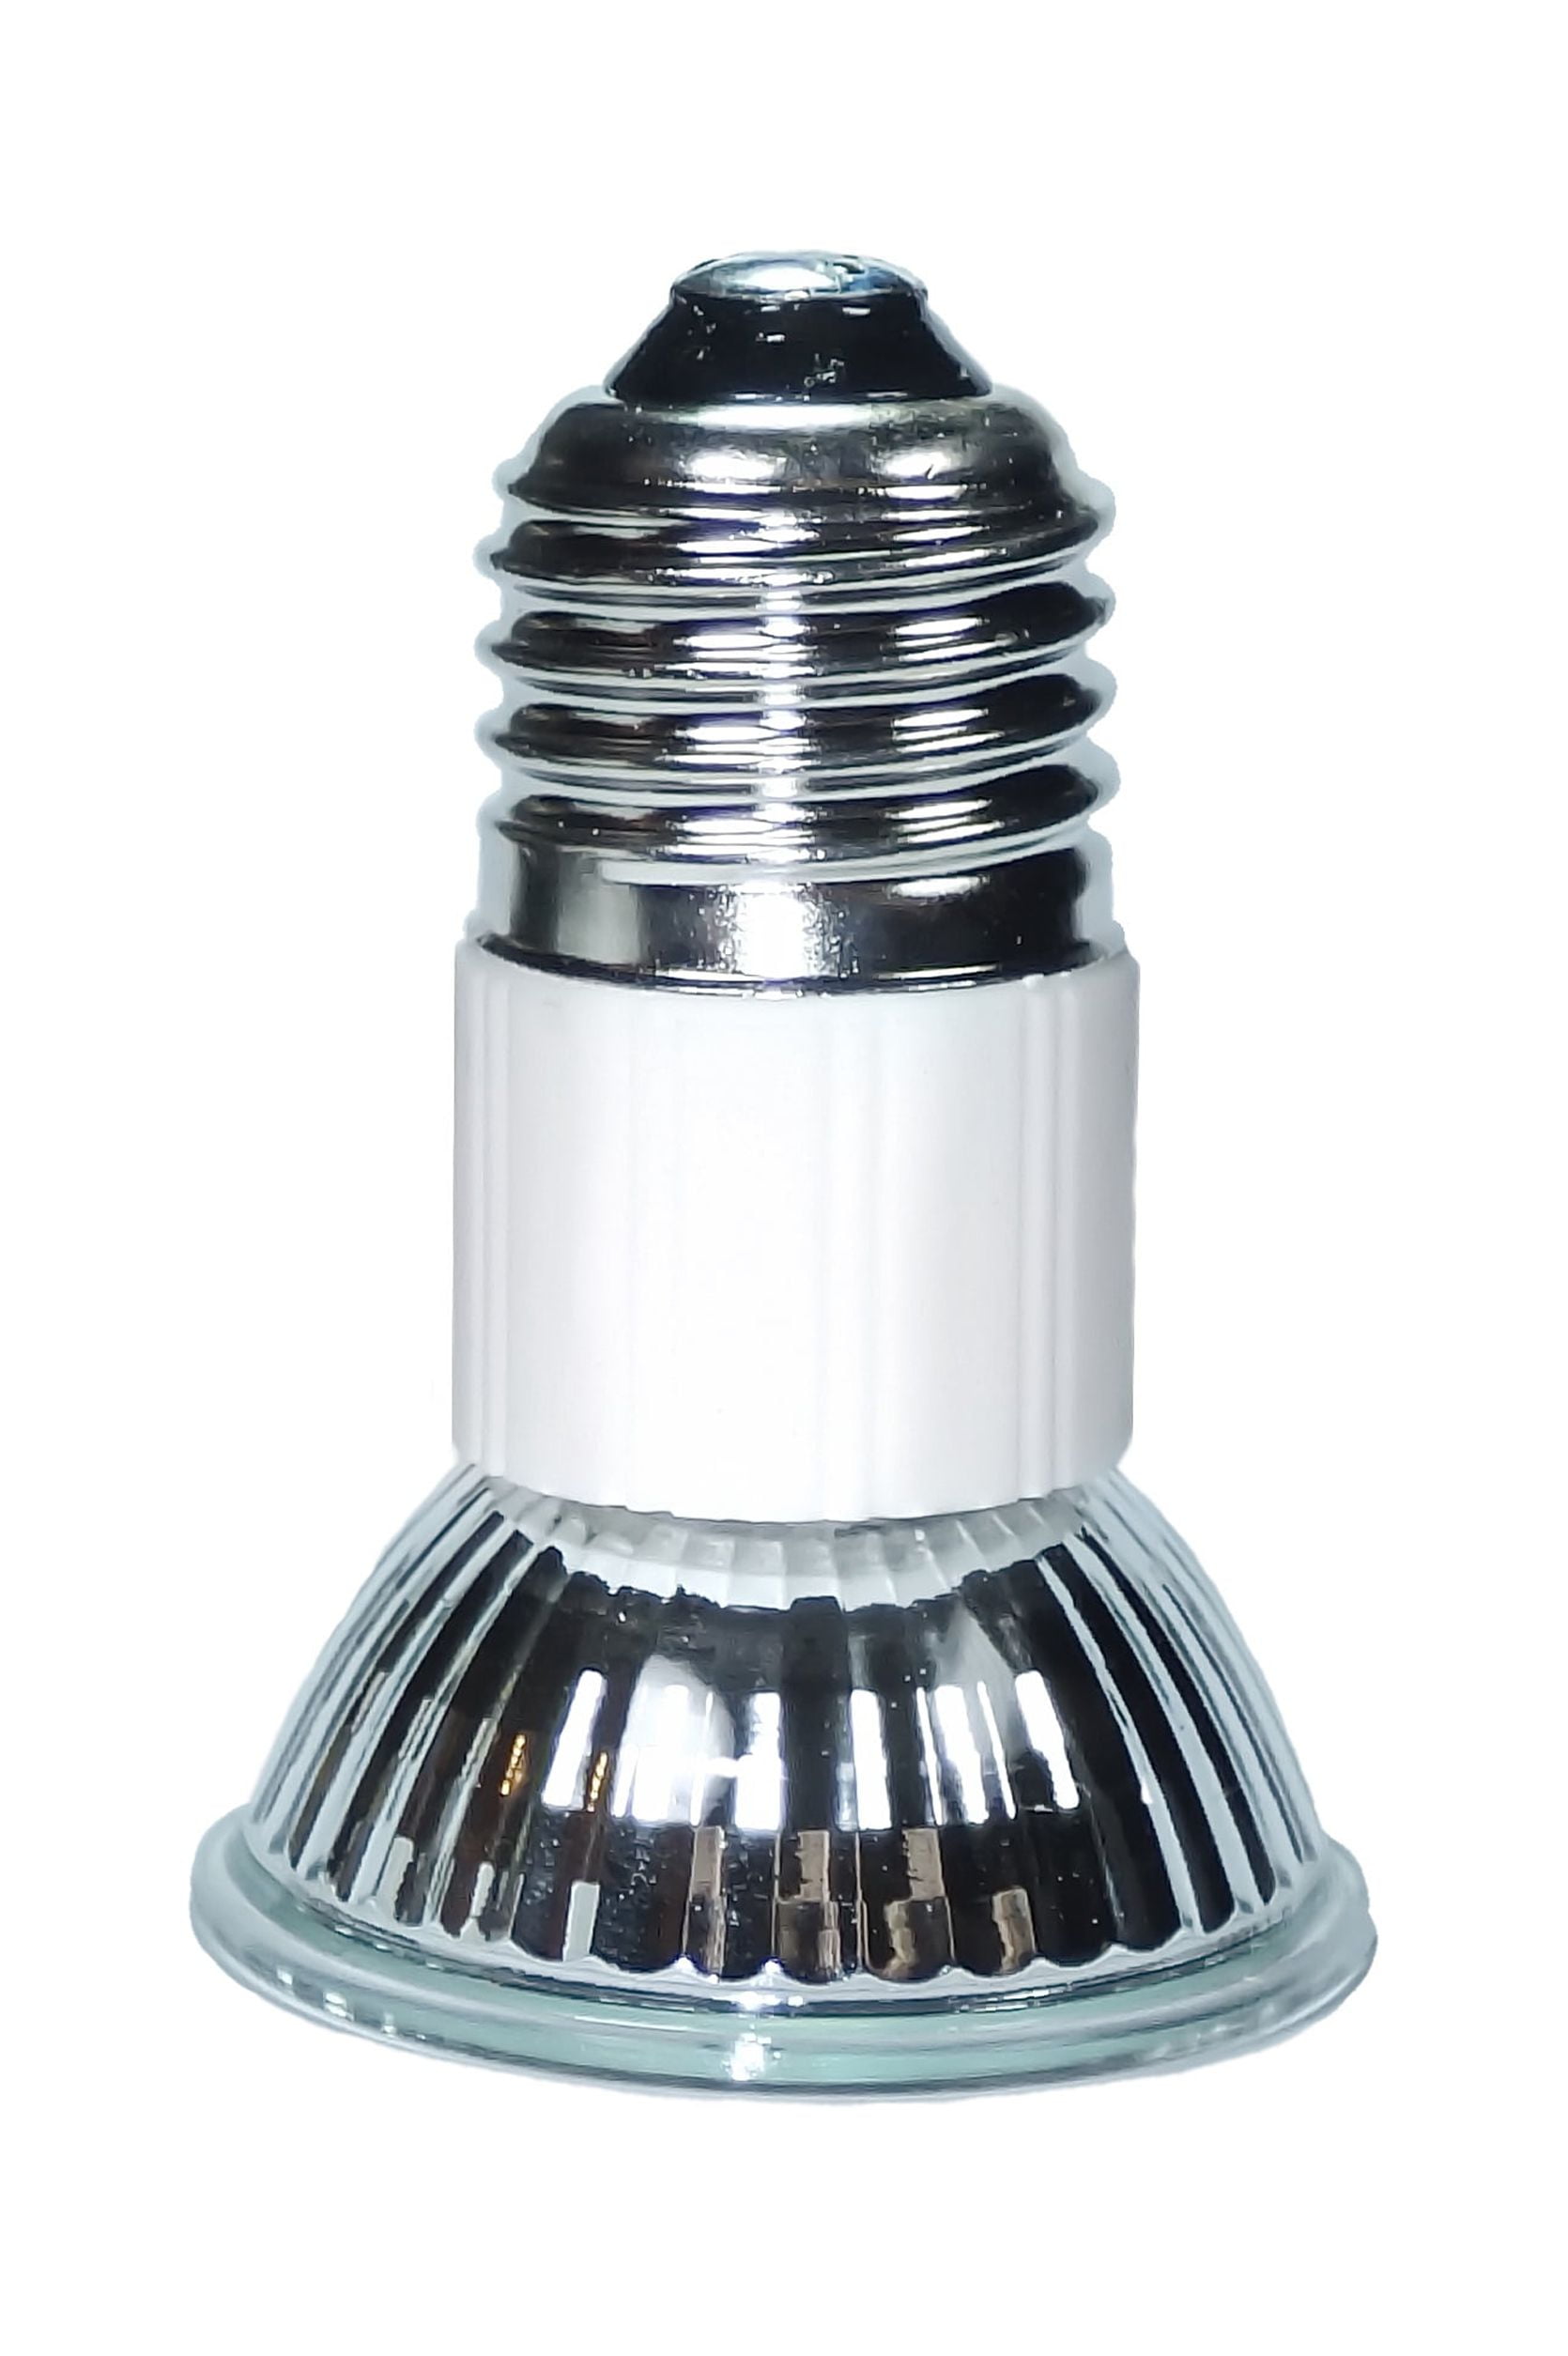 LSE Lighting 75W Range Hood Bulb - Compatible Replacement for Dacor #62351  #92348 